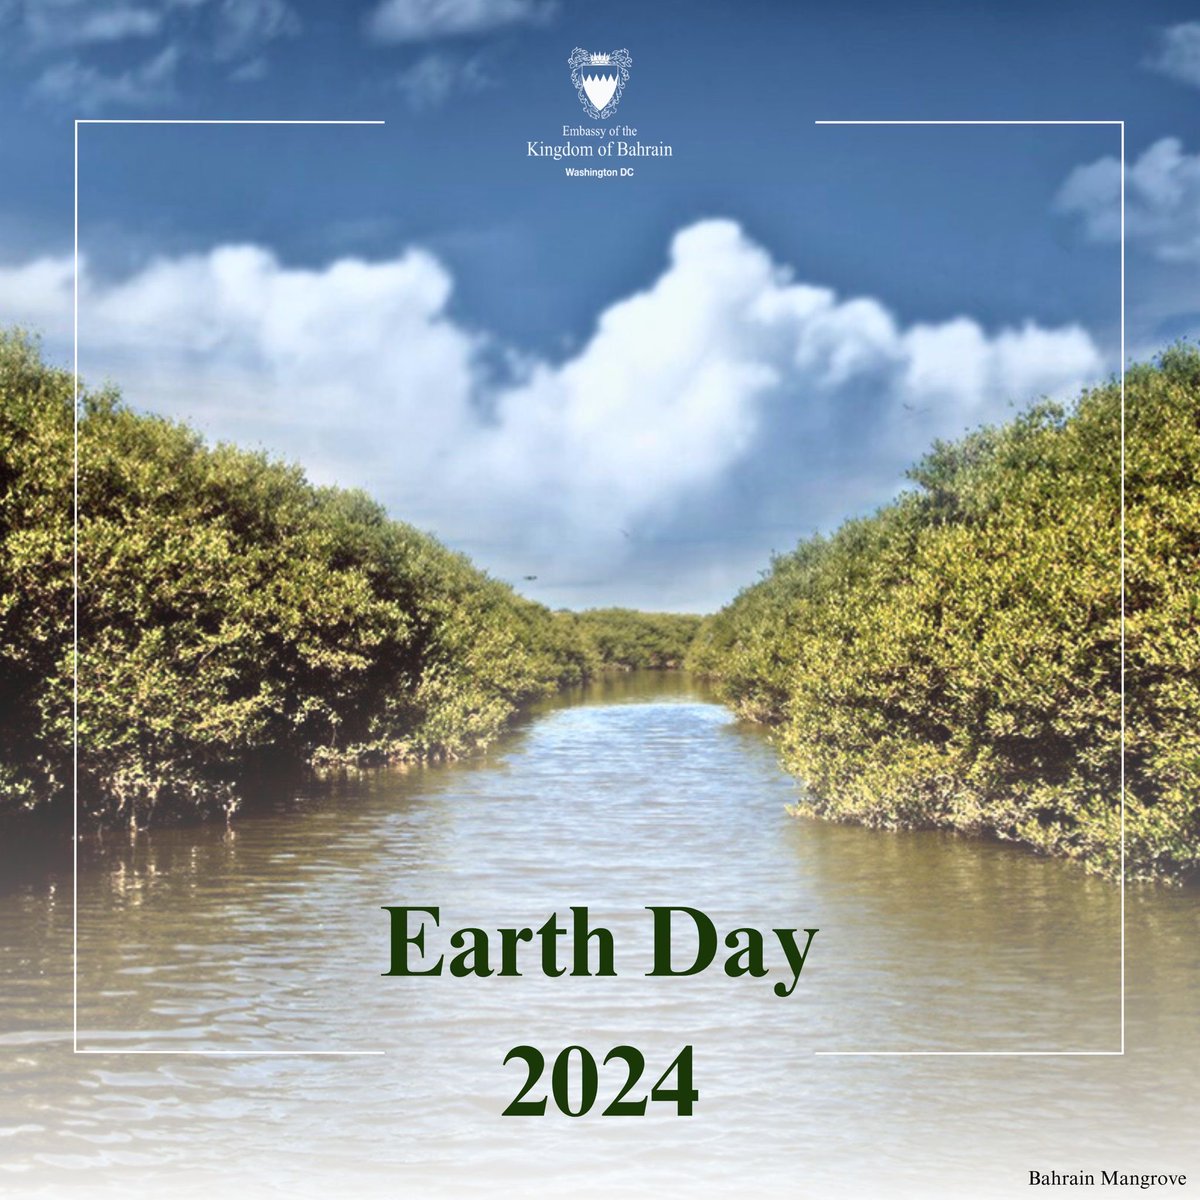 On Earth Day, I want to celebrate all of those in the Kingdom of Bahrain who are making a difference on a daily basis to create a more #sustainable and environmentally friendly Bahrain. Future generations to come will thank you for giving back. #EarthDay